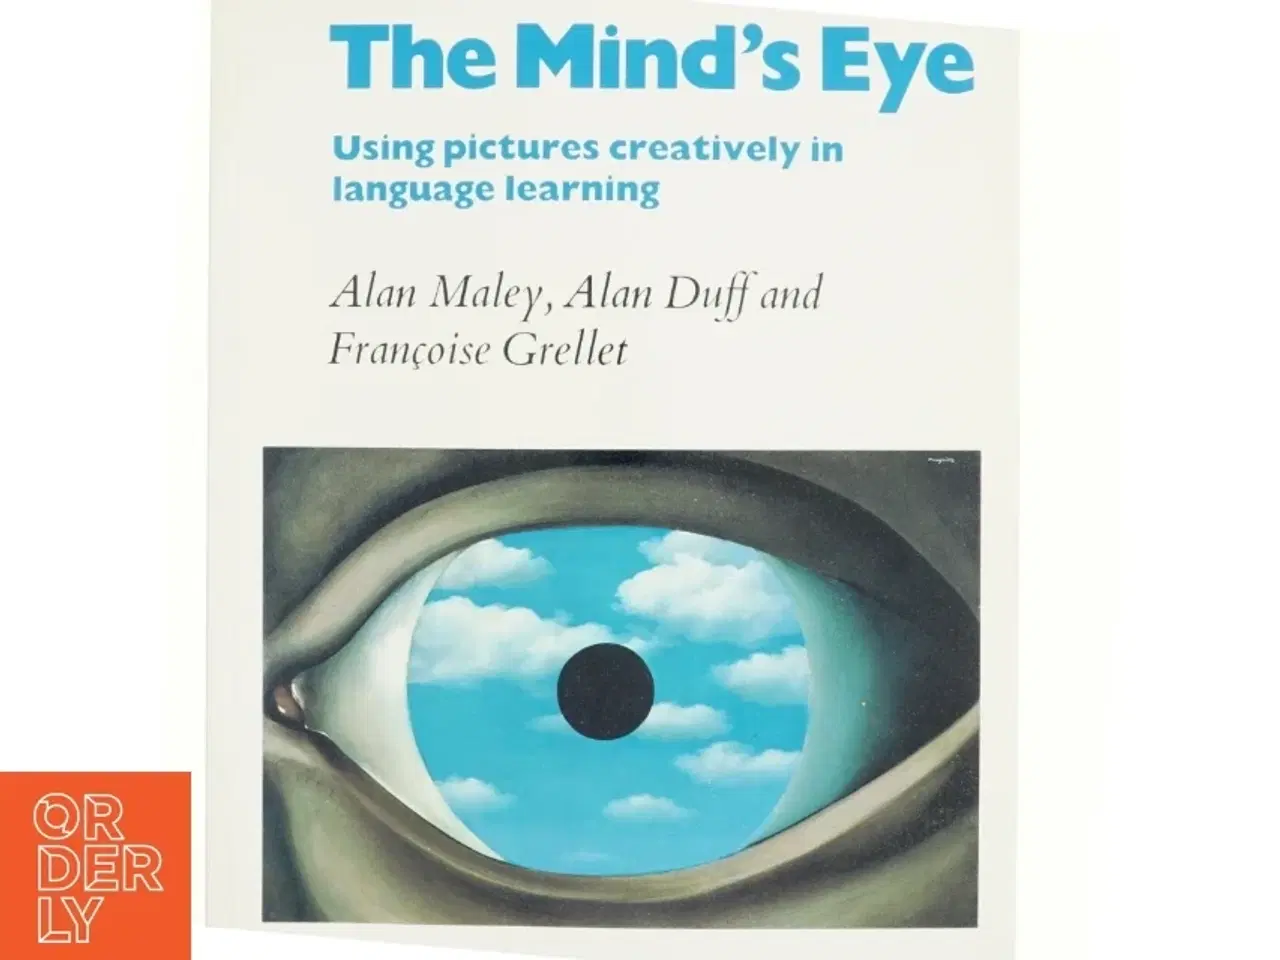 Billede 1 - The mind's eye : using pictures creatively in language learning (Bog)